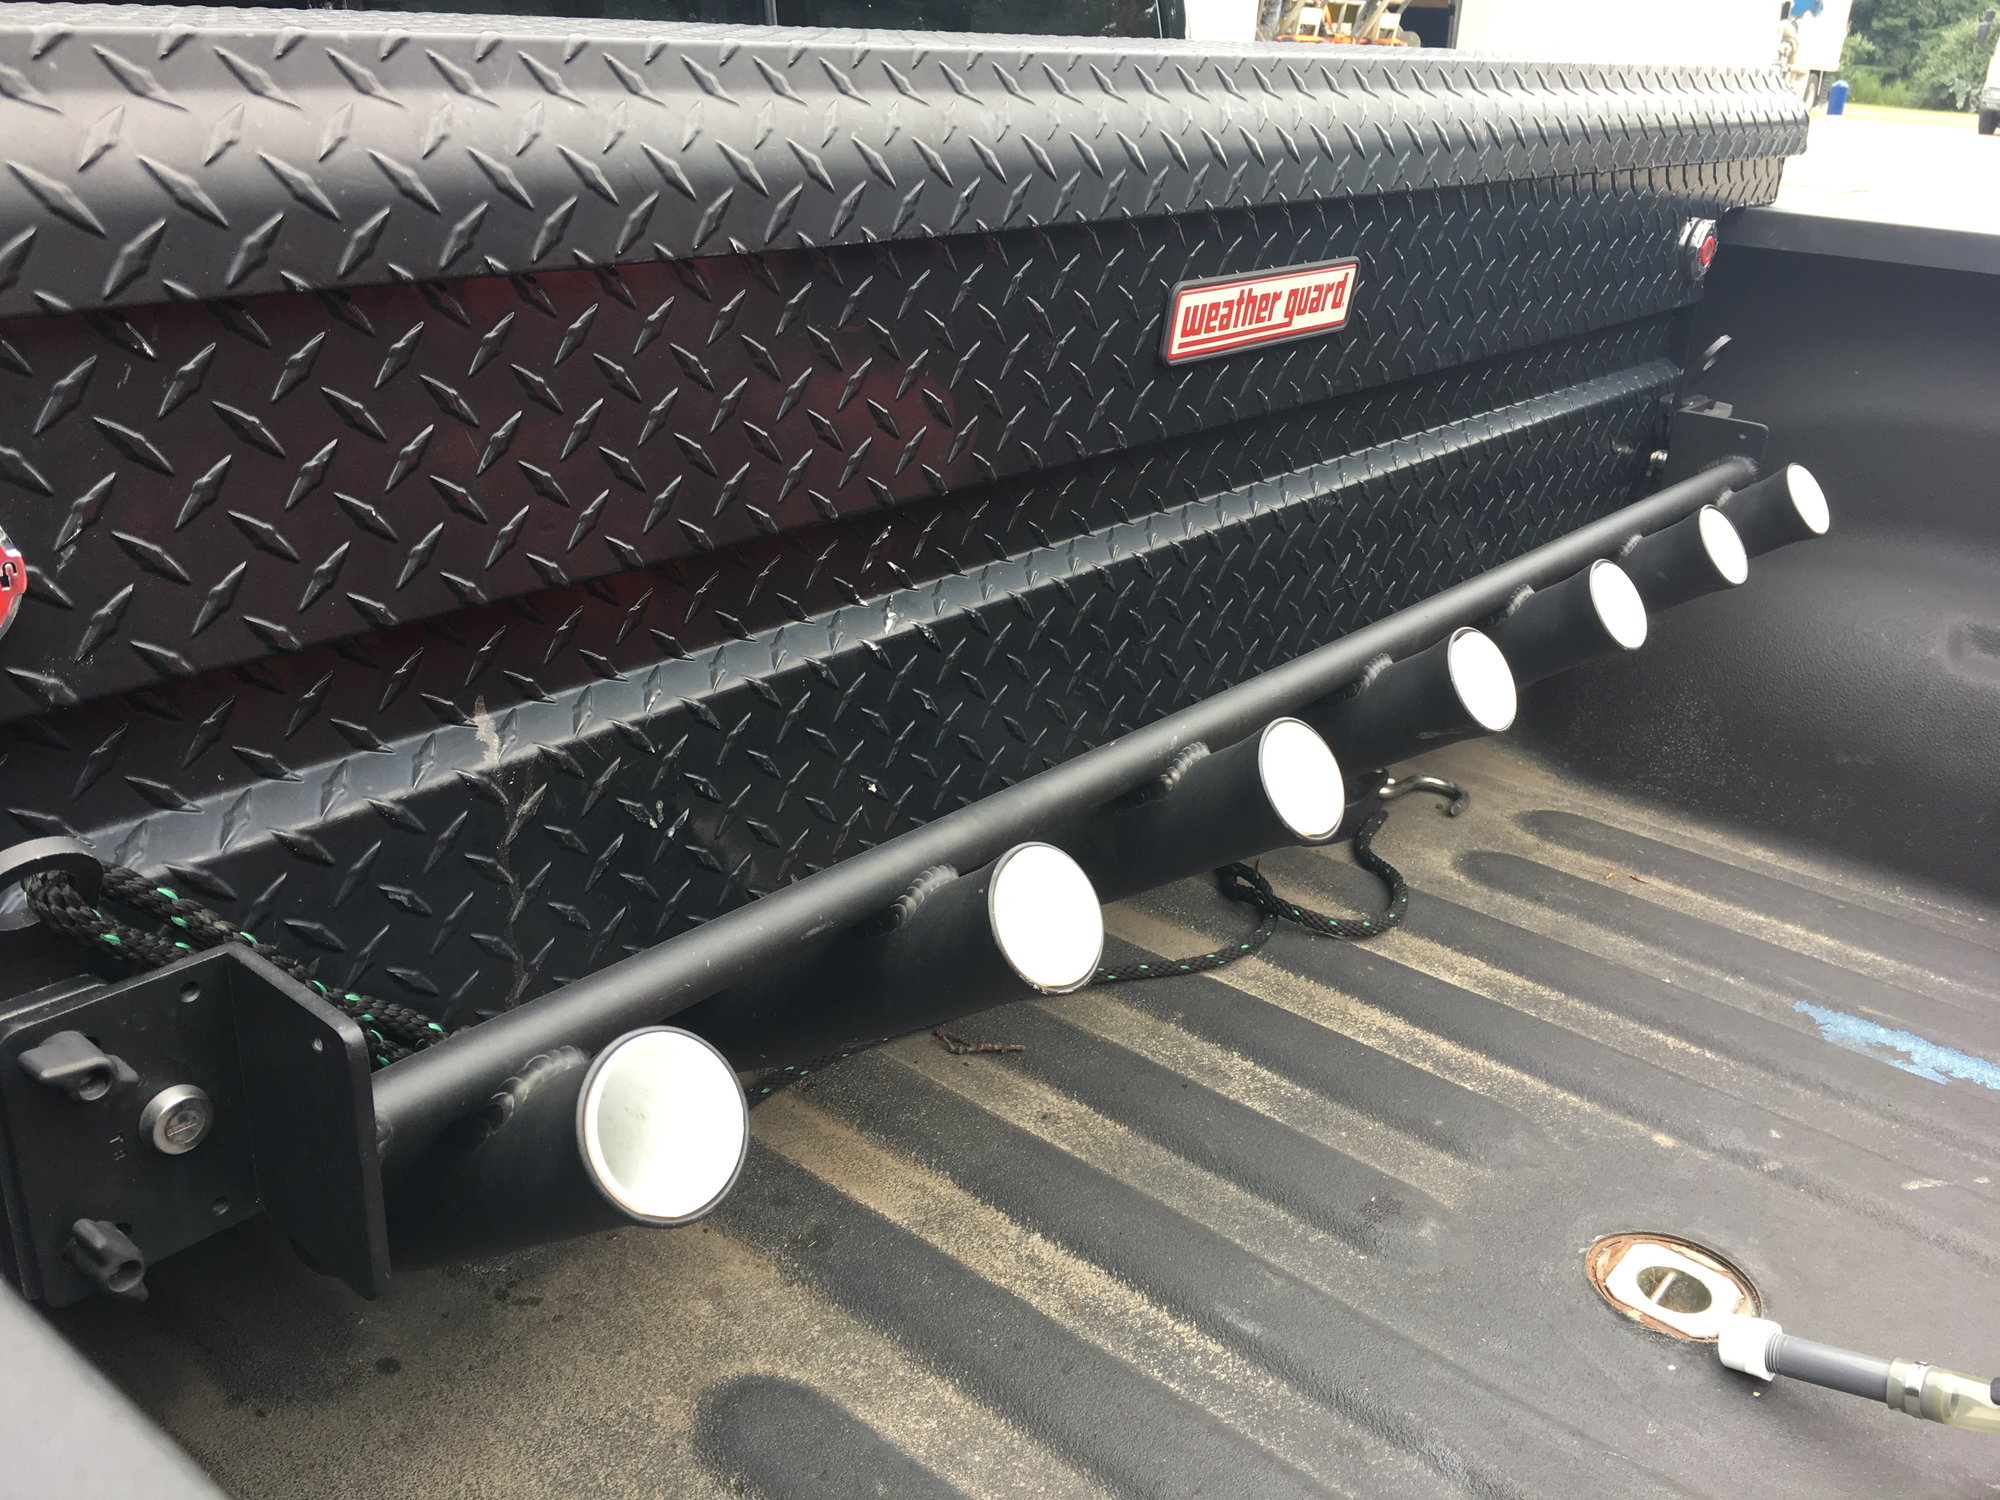 Truck bed rod holder setups - The Hull Truth - Boating and Fishing